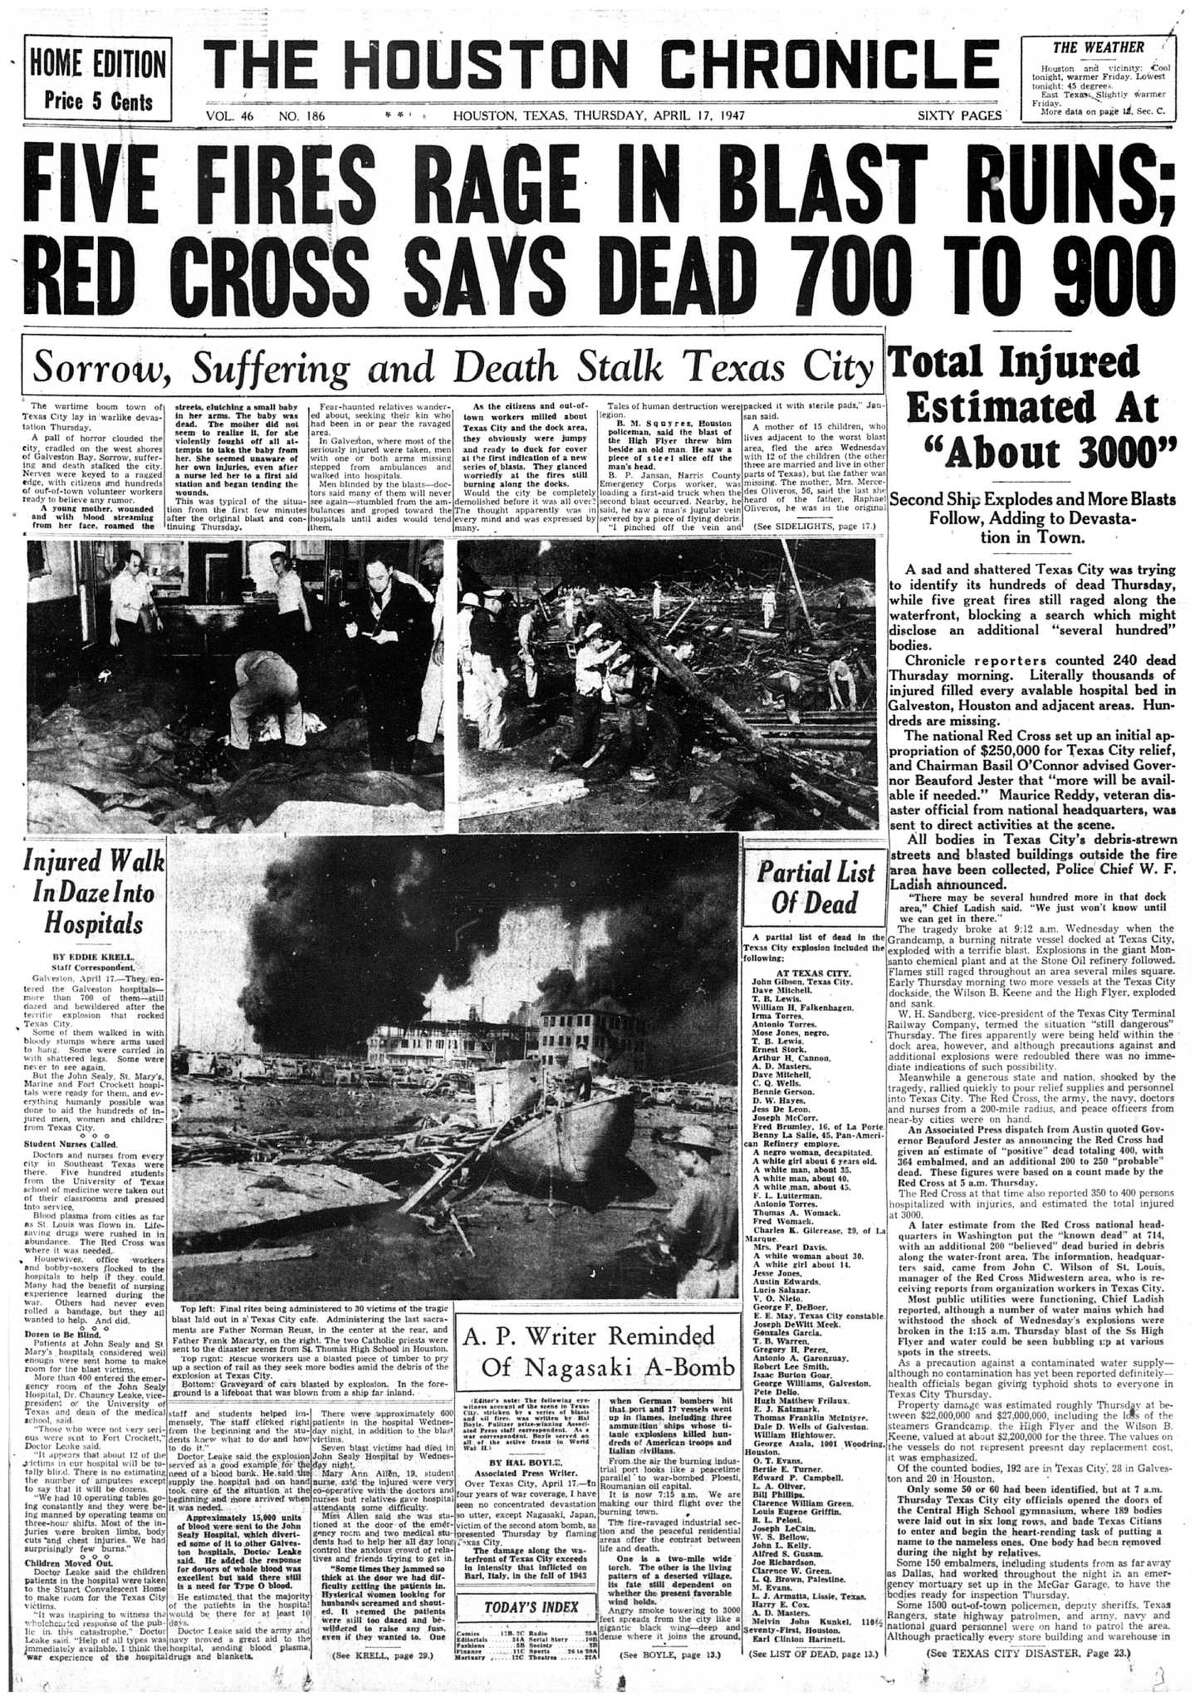 Houston Chronicle front page - April 17, 1947 - section 1, page 1.